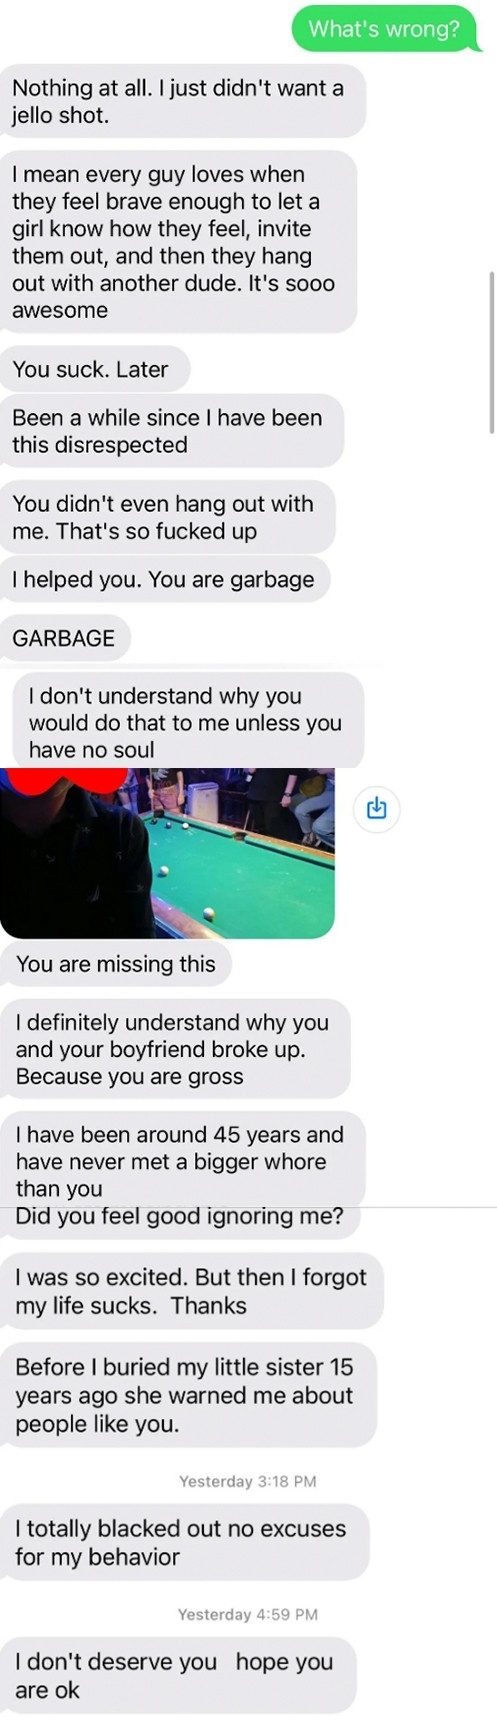 Text message exchange showing a heated conversation with insults and a person being blocked